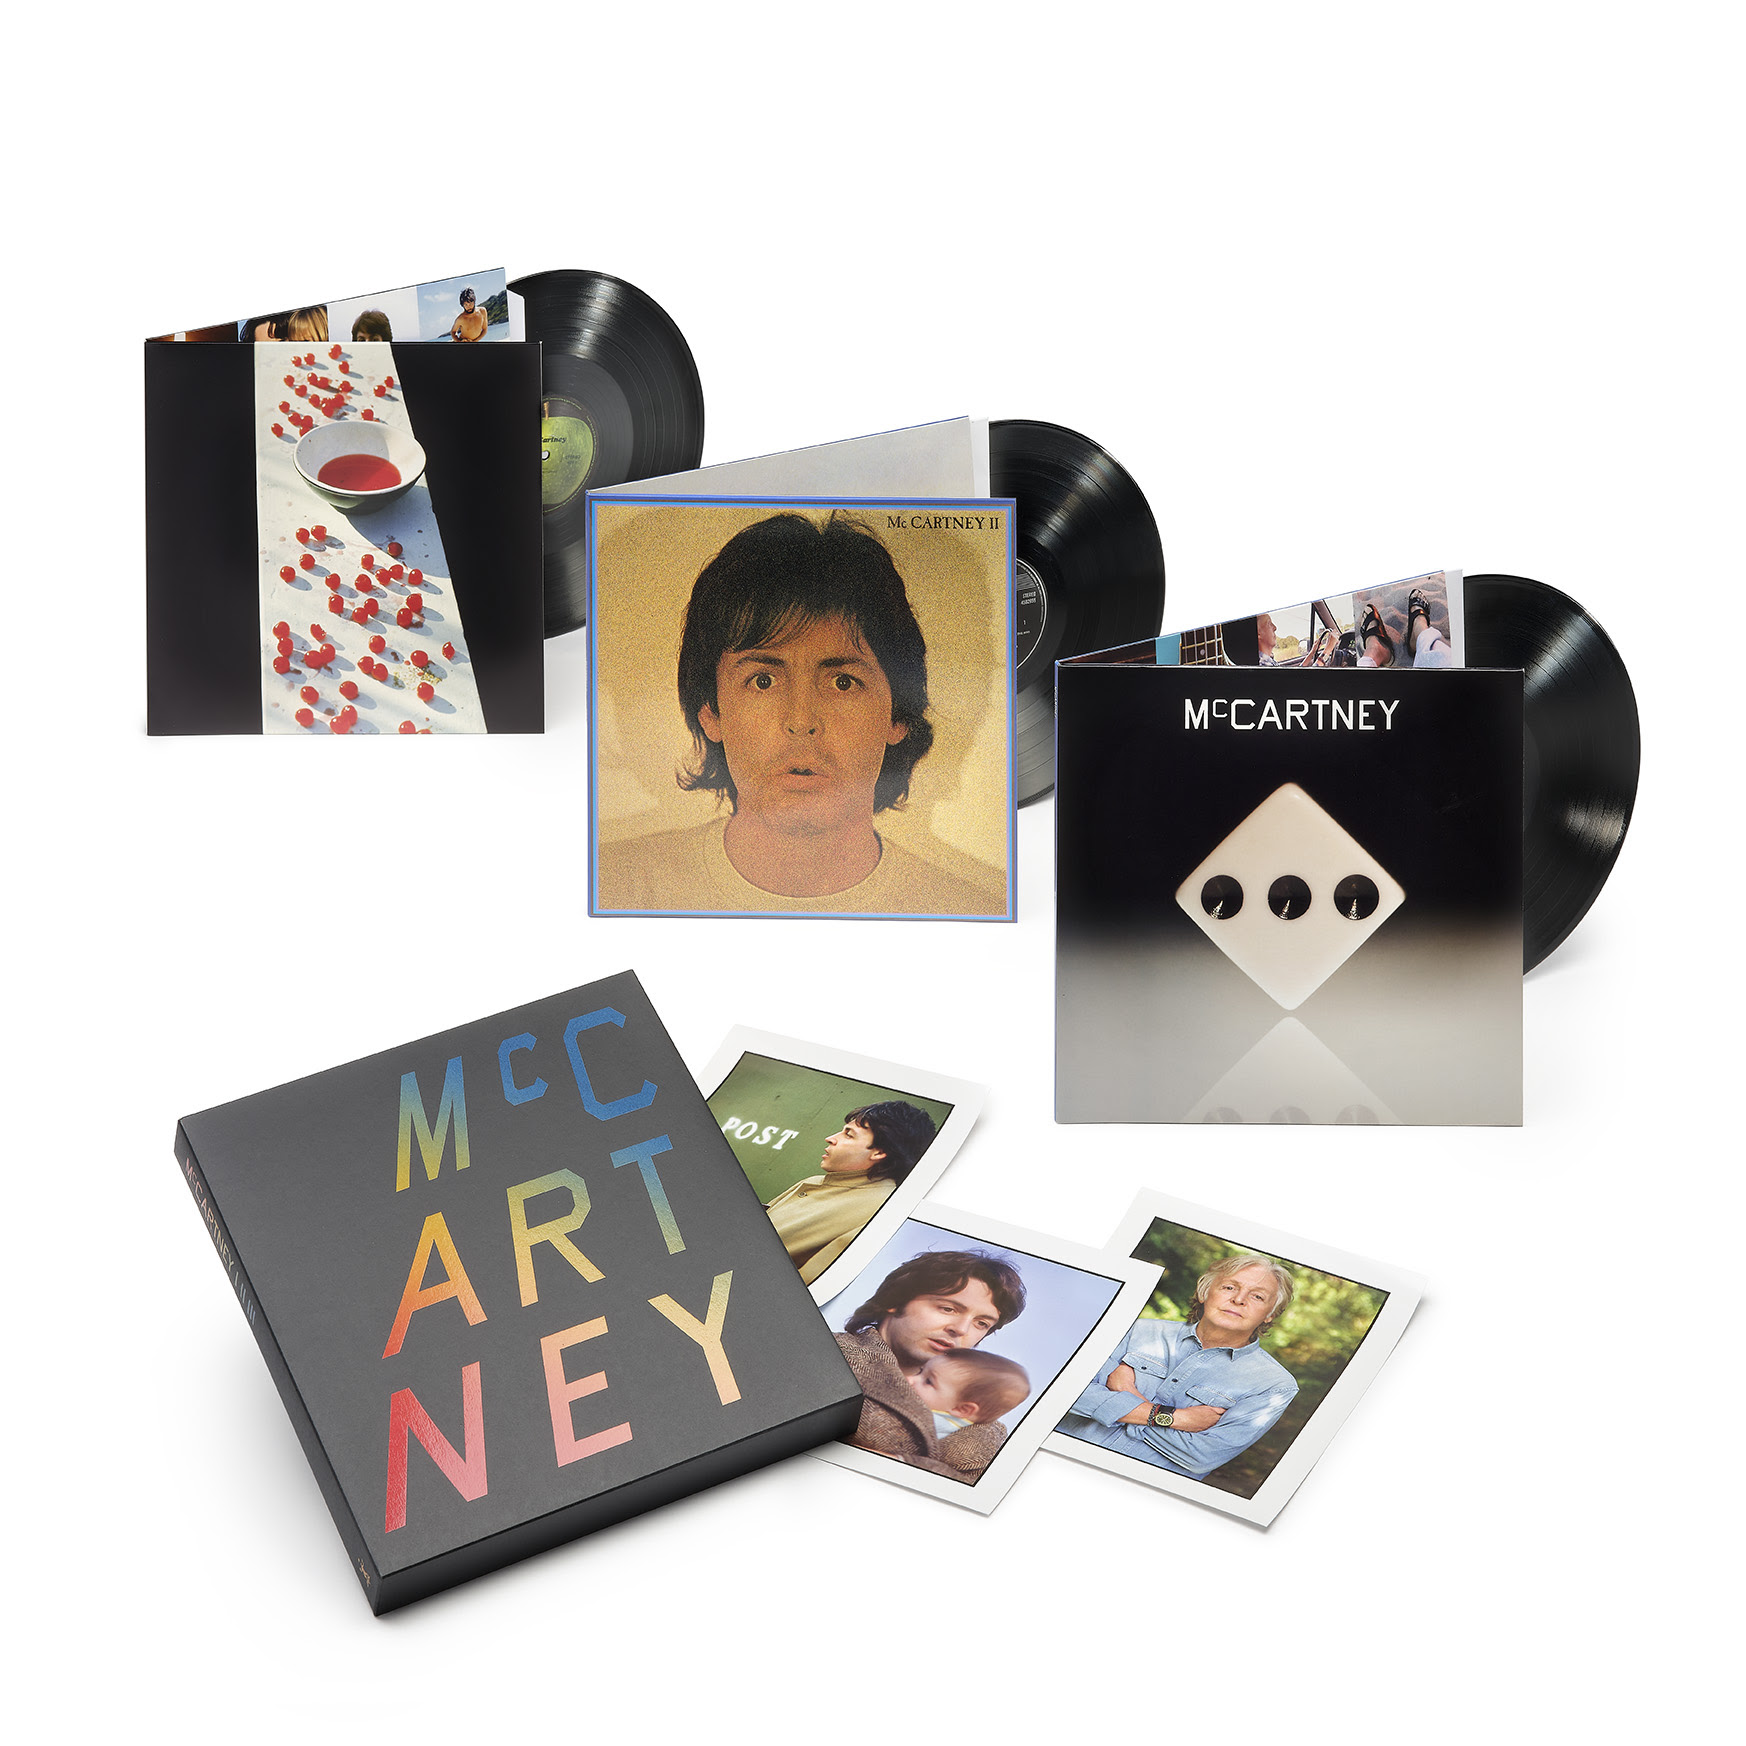 Paul McCartney's three iconic solo albums available together for the first time as a limited-edition box set